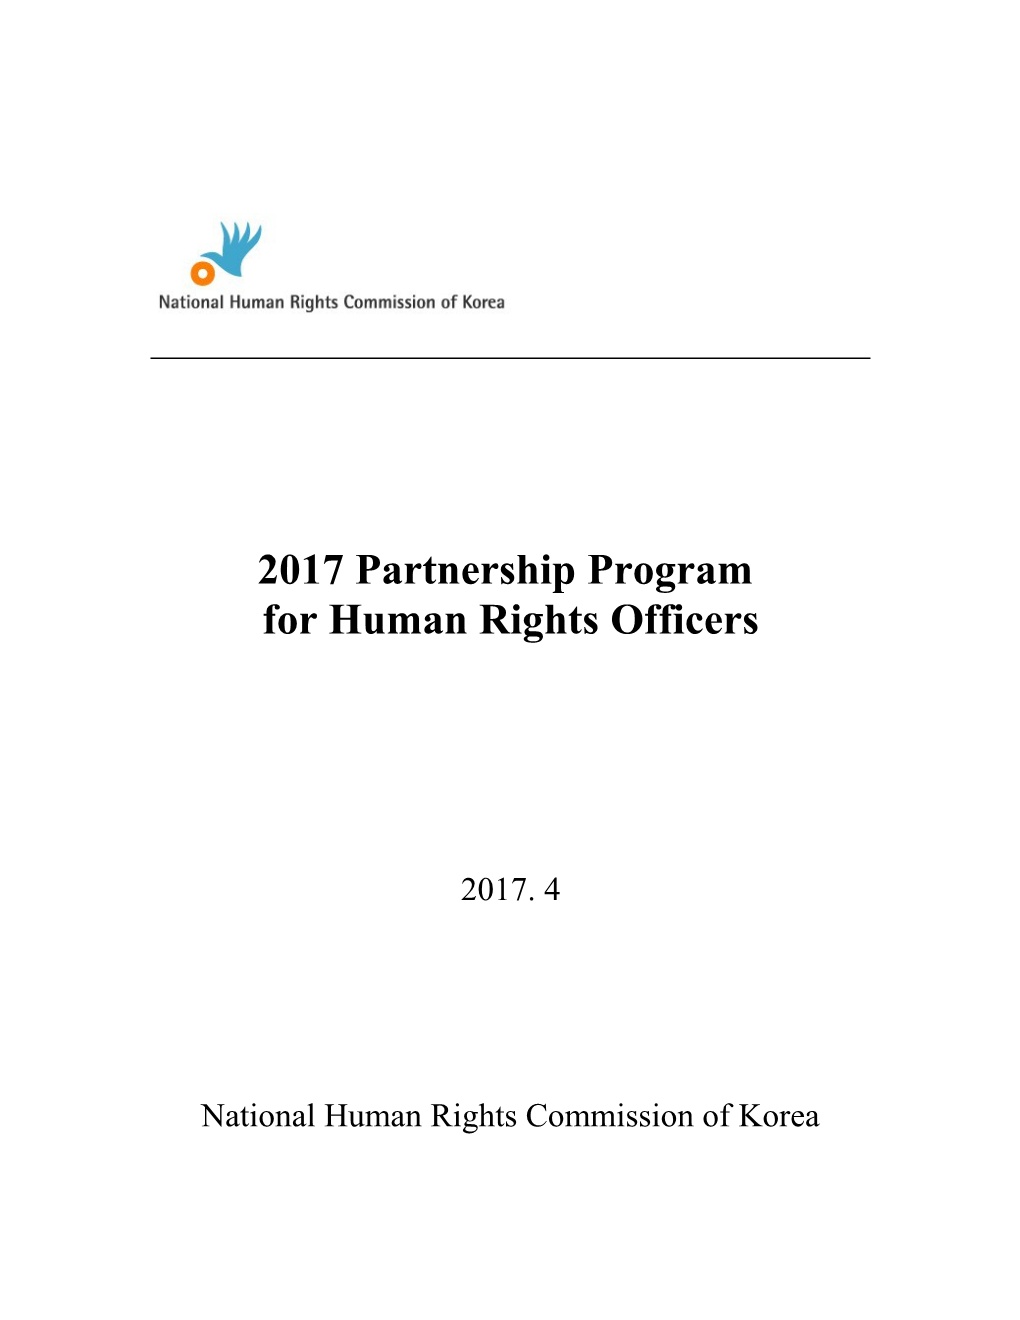 For Human Rights Officers